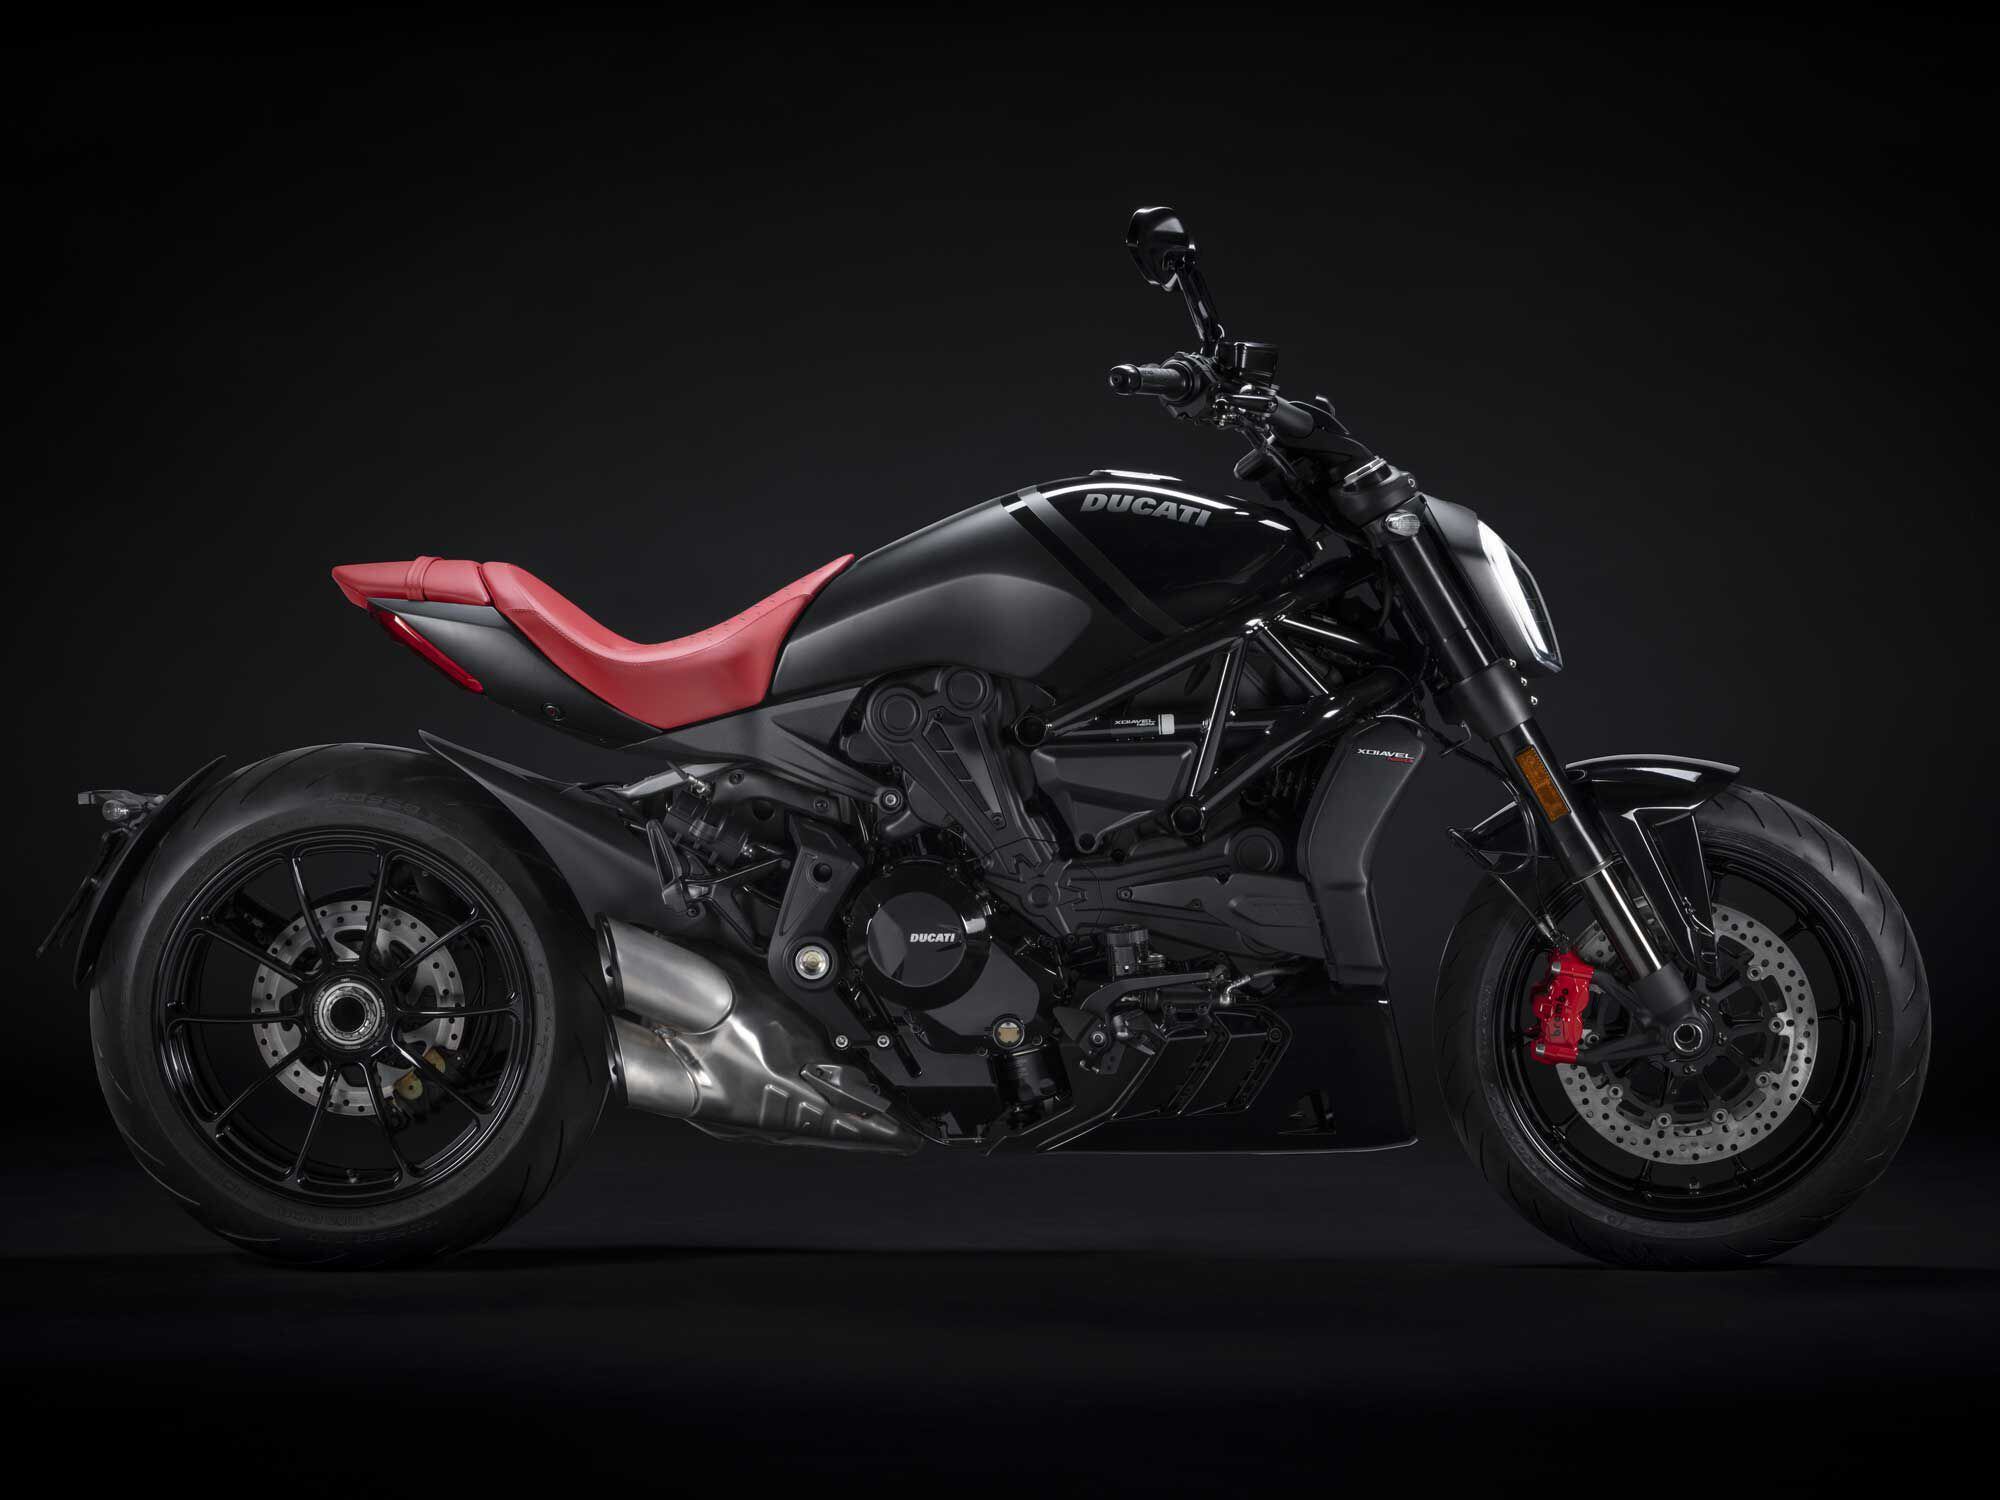 Behold the new XDiavel Nera, a 160 hp street-smart brawler, dressed in the latest Italian couture.